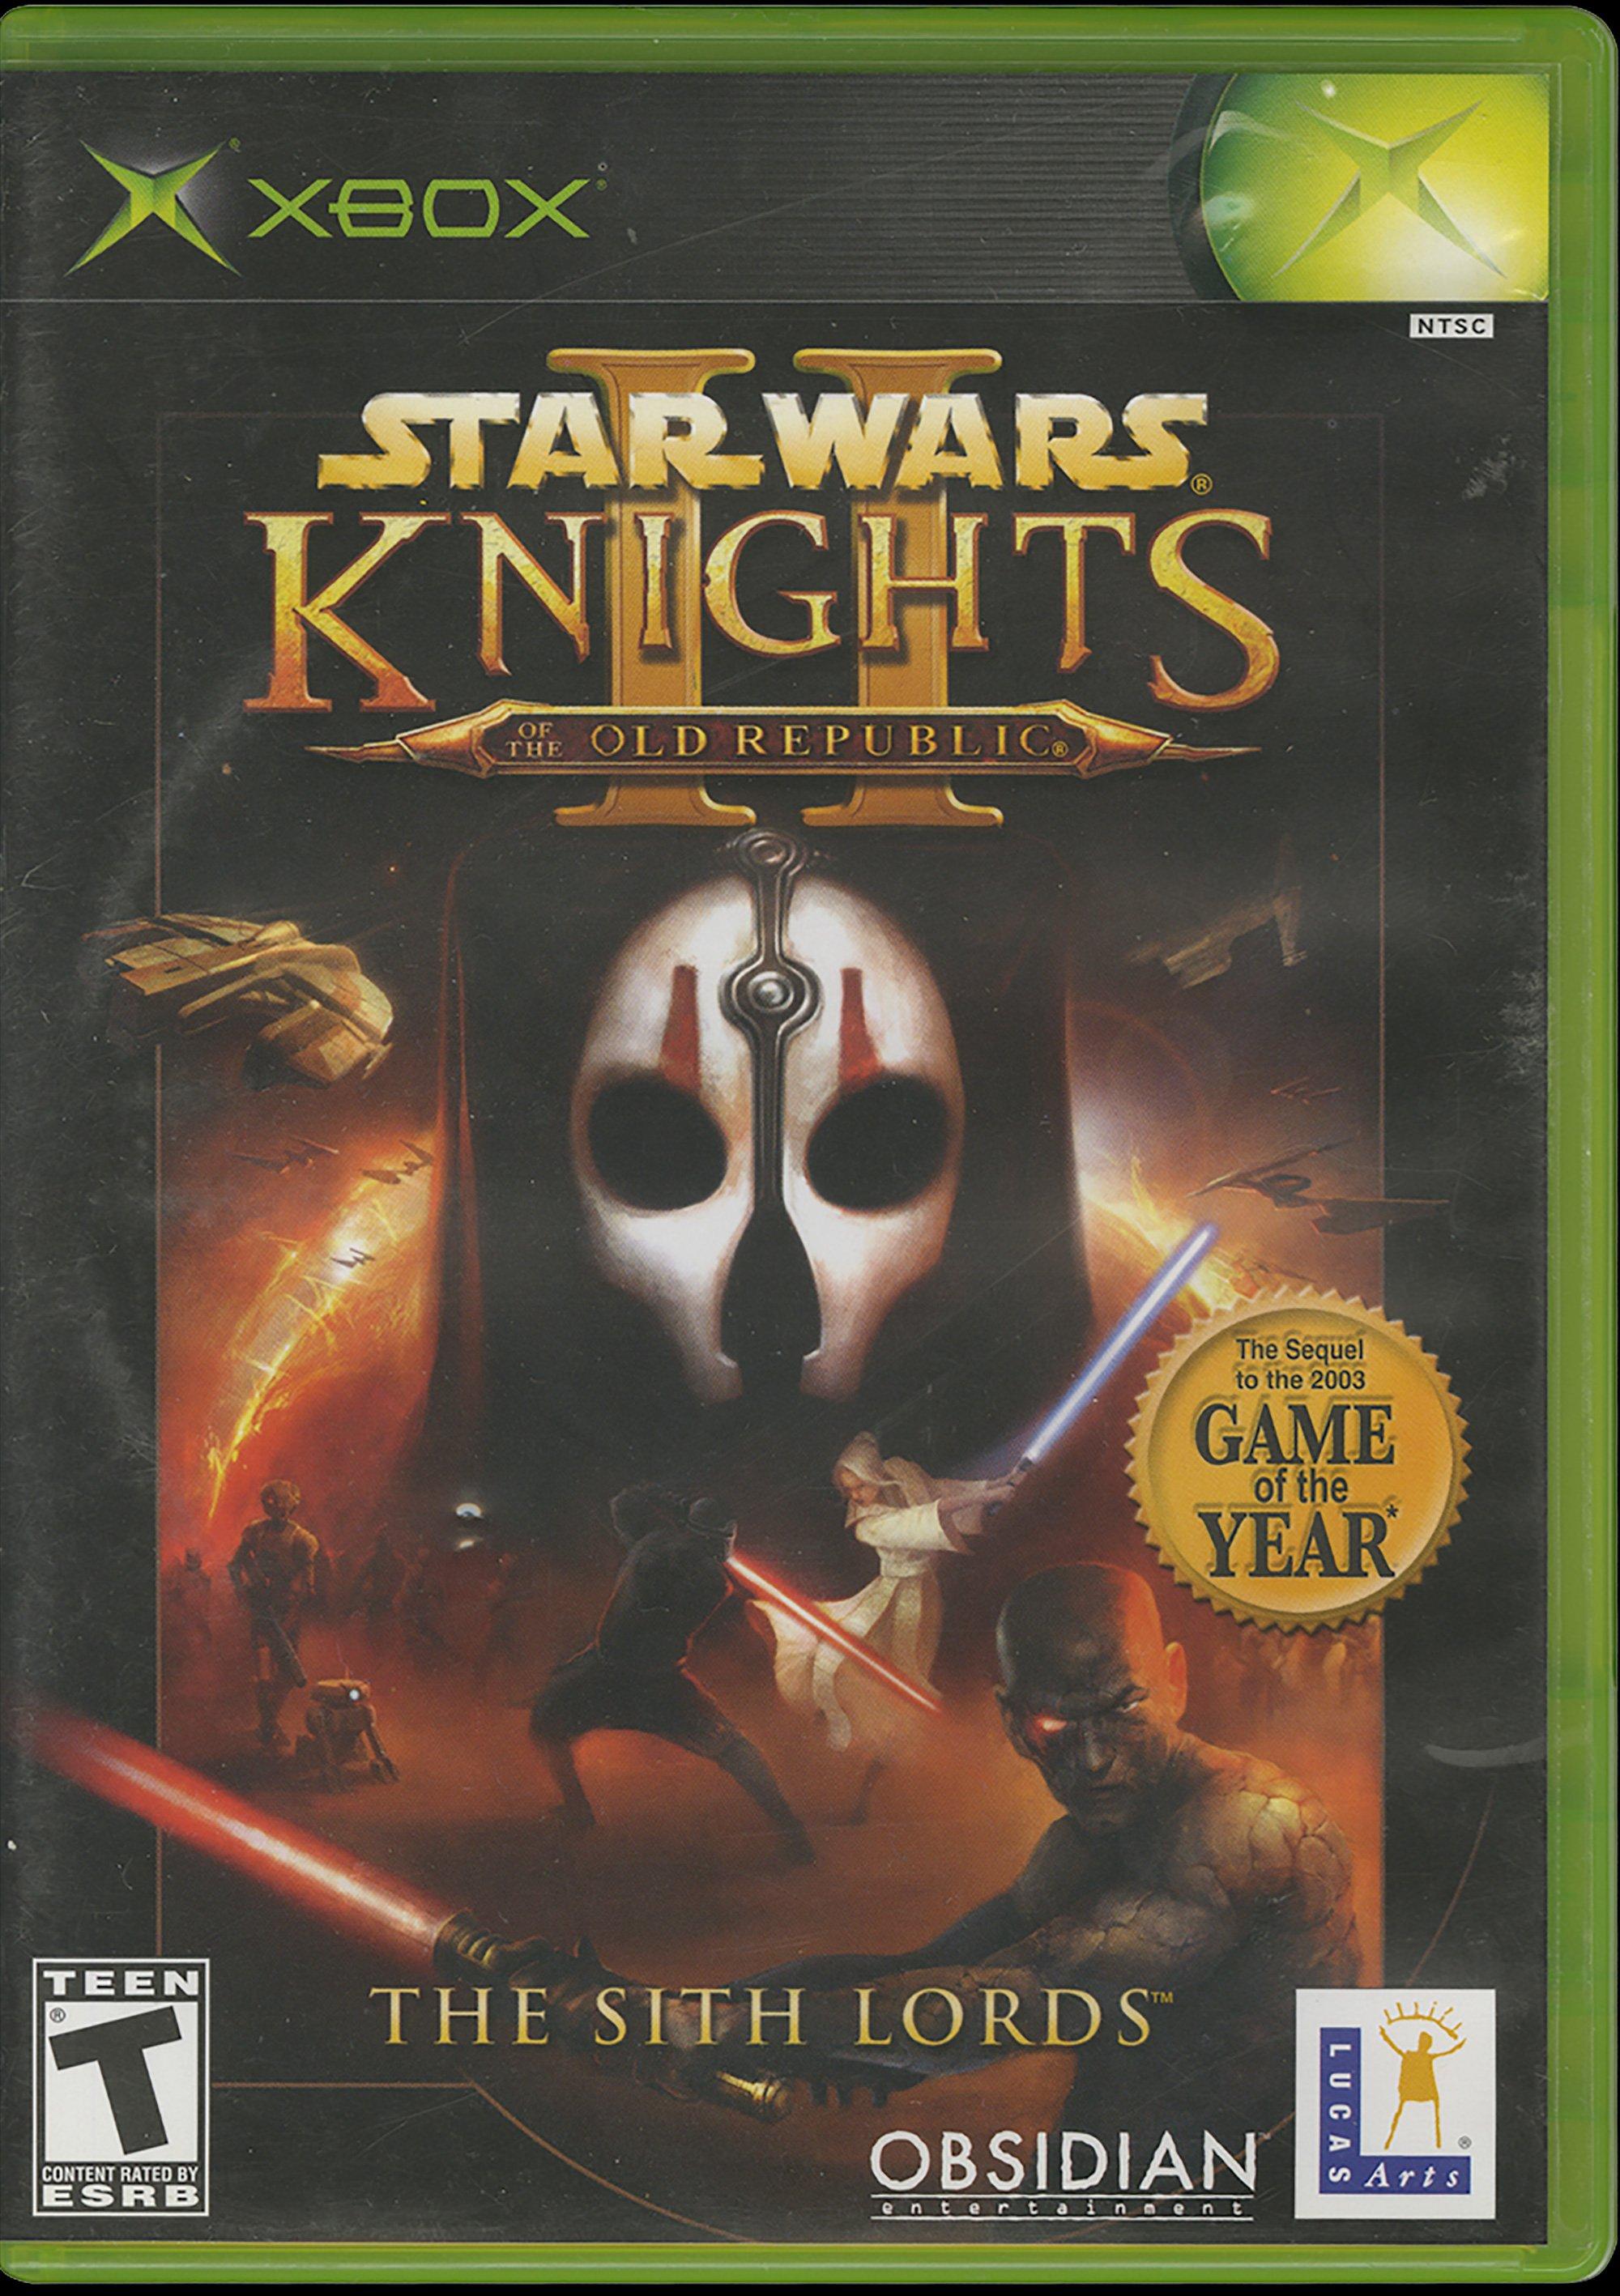 knights of the old republic xbox 360